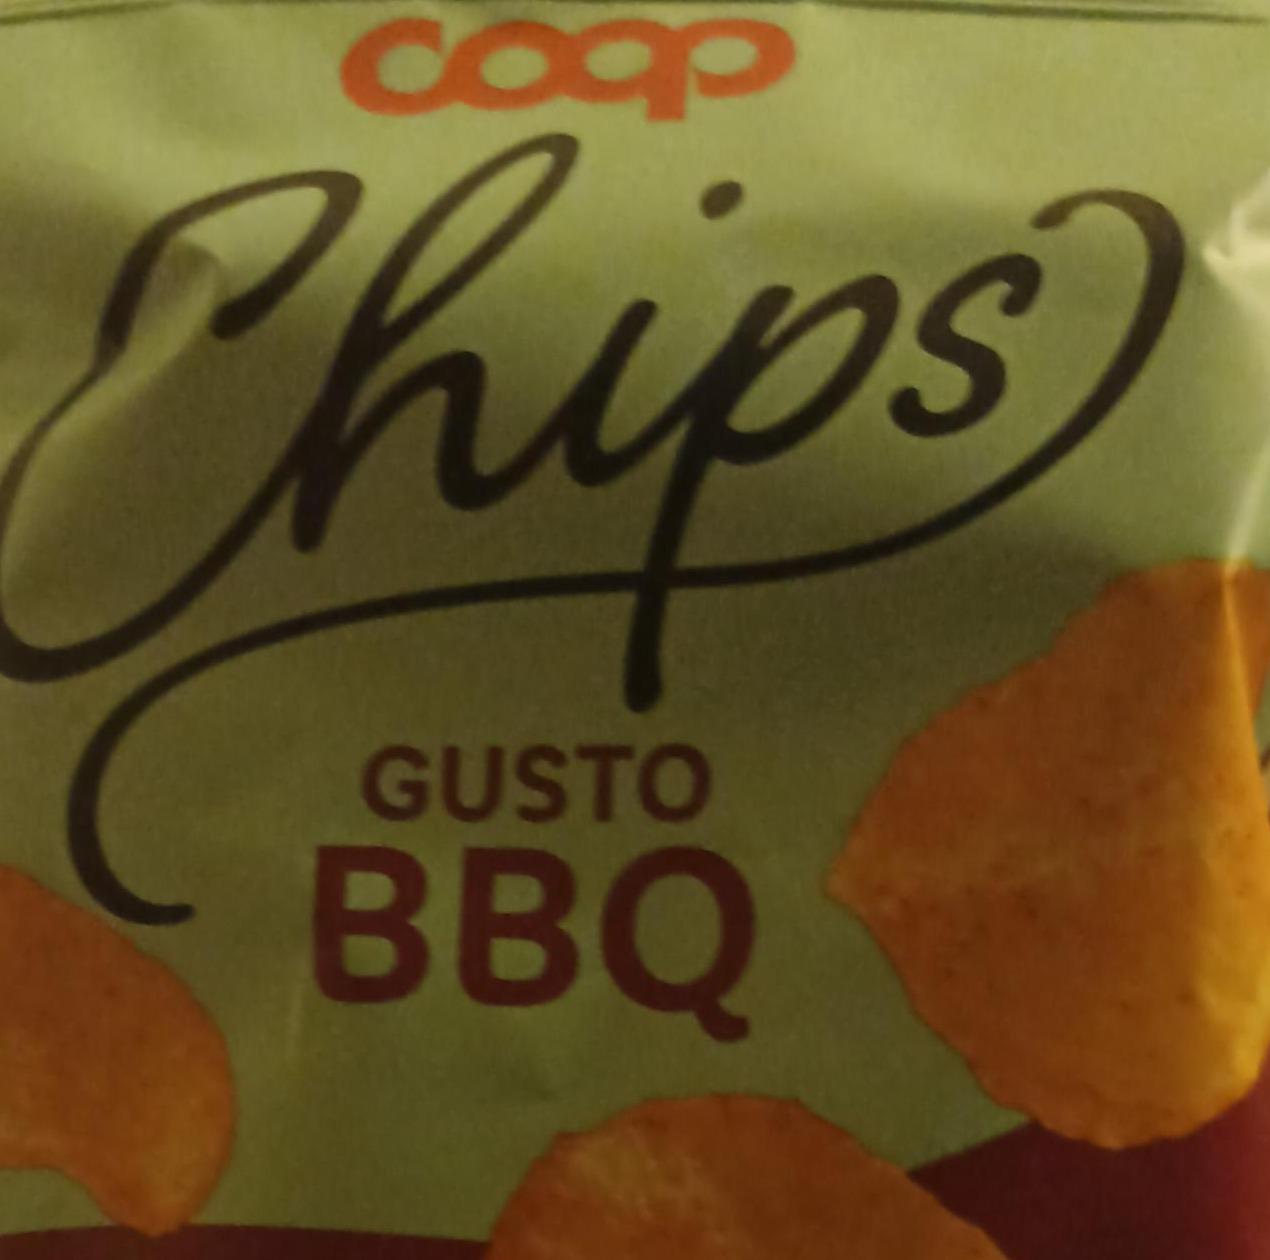 Фото - Chips Gusto BBQ Coop